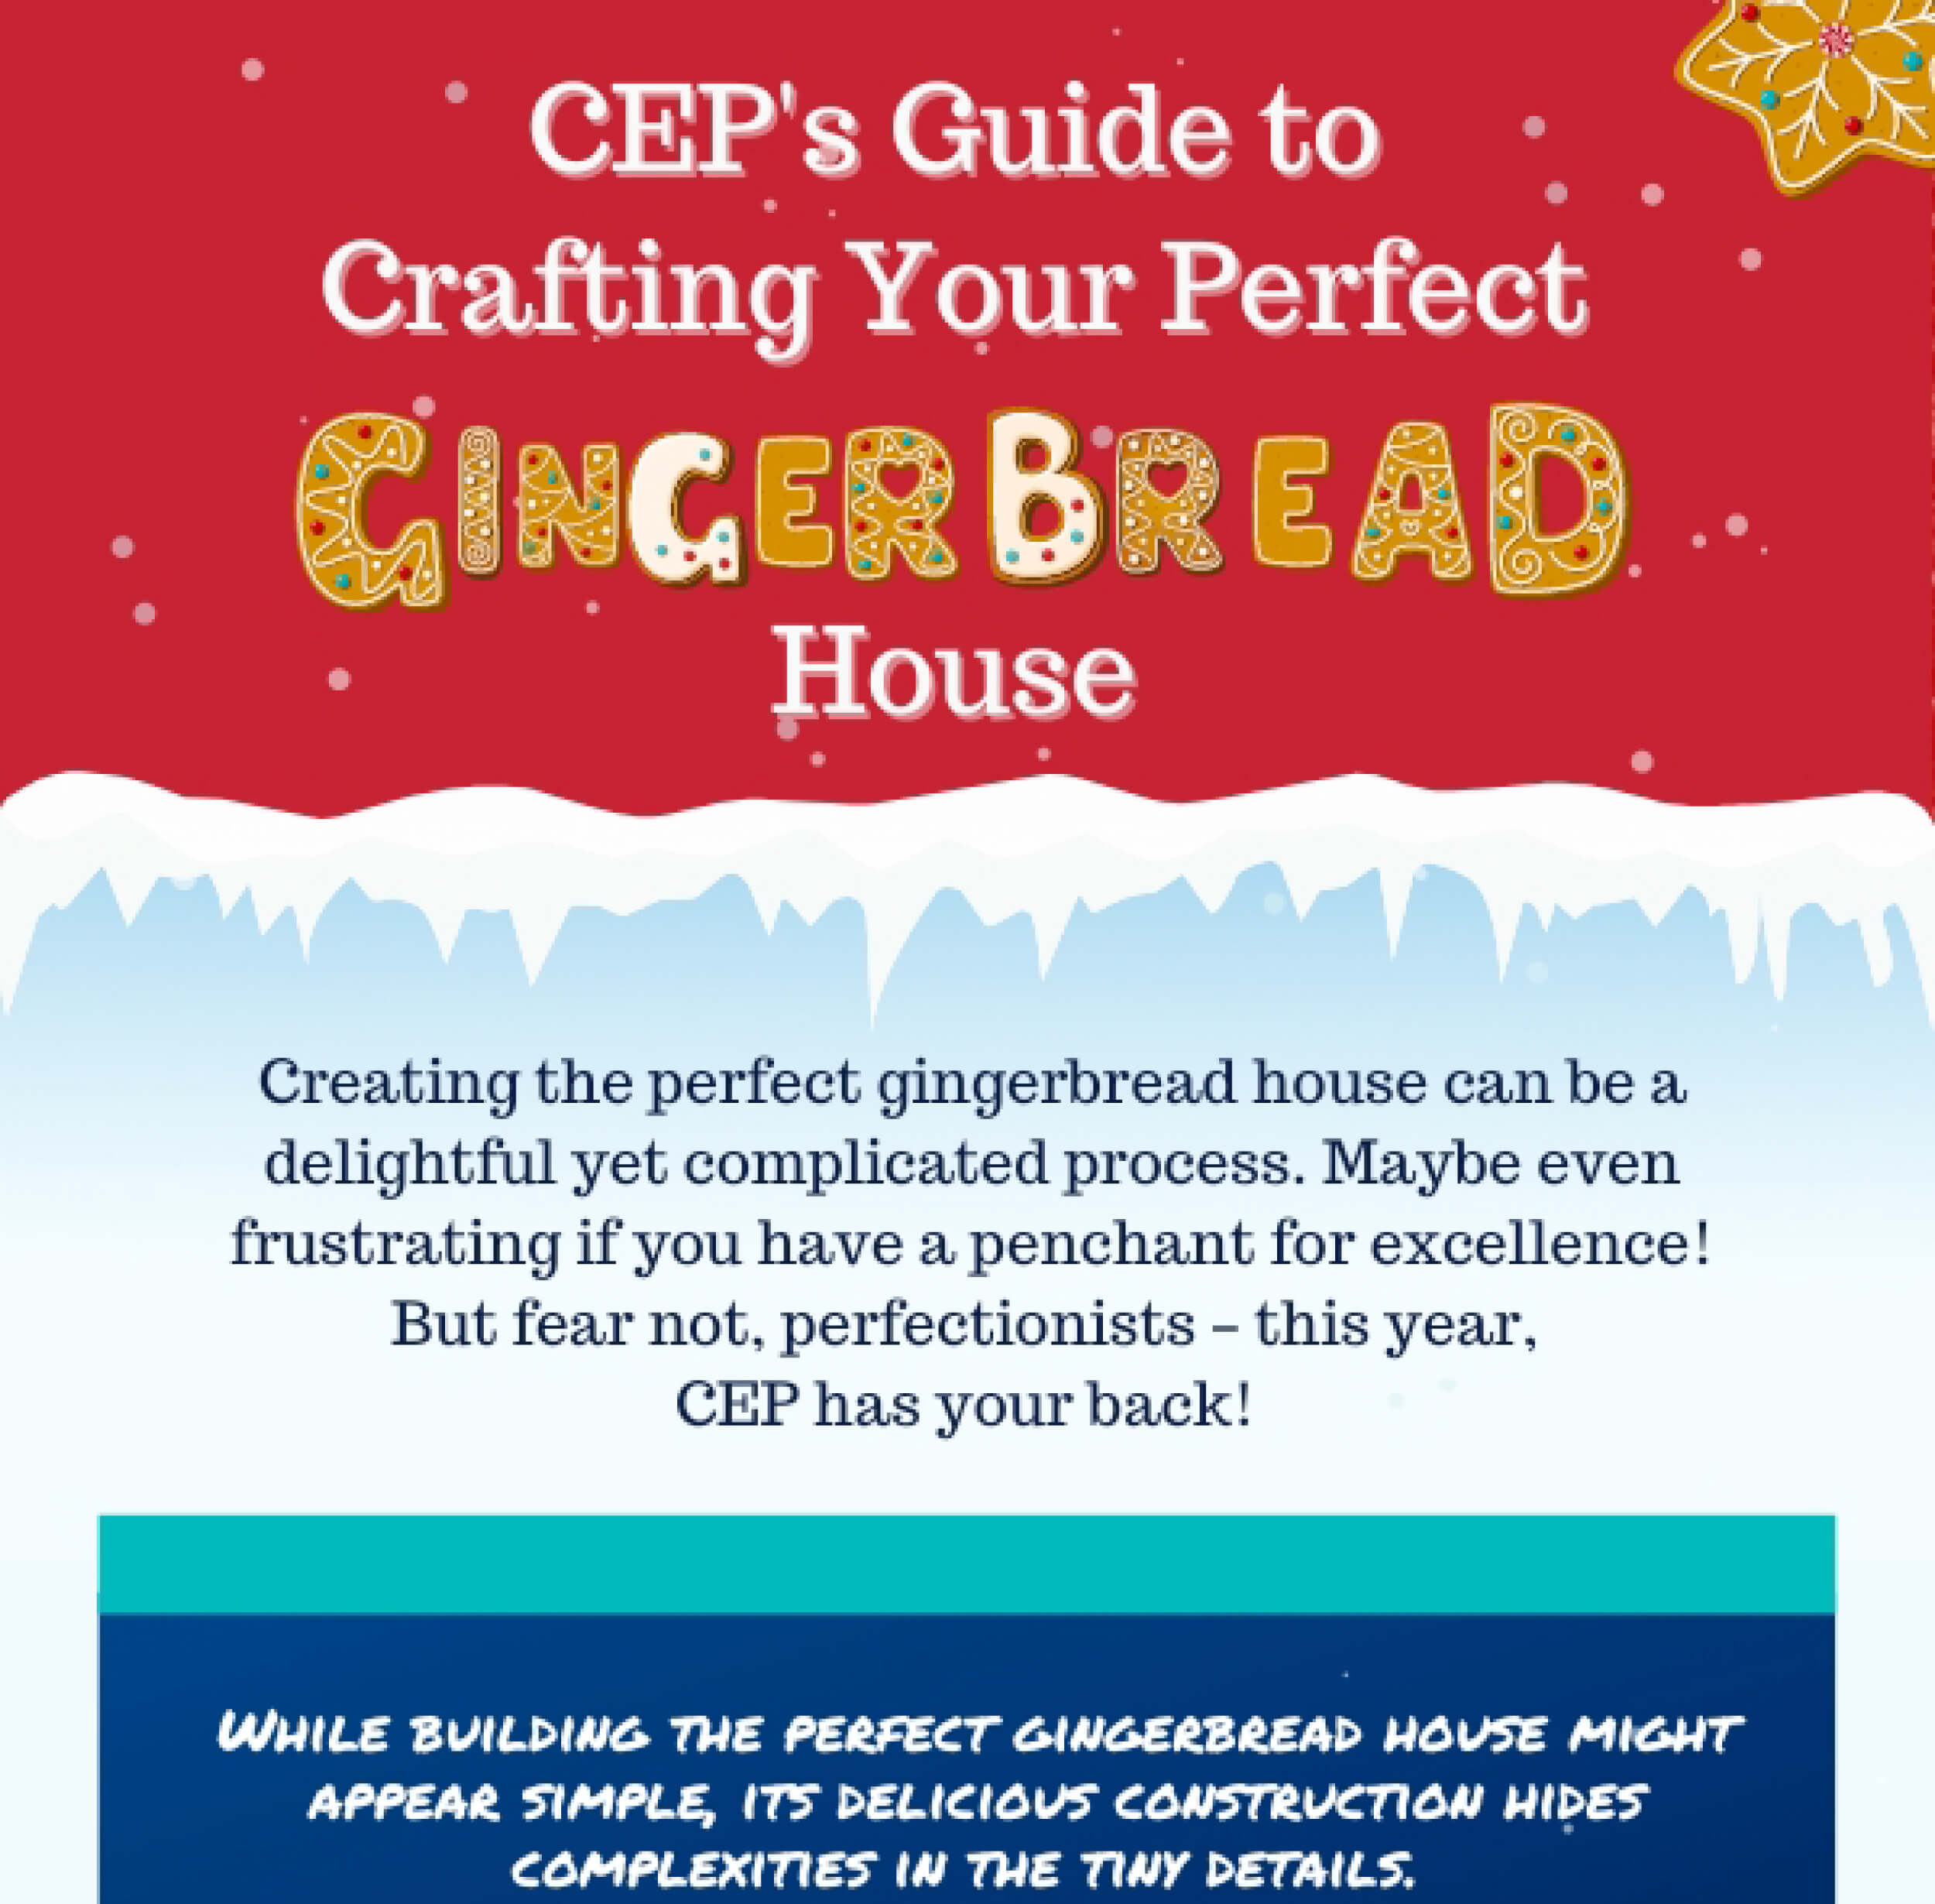 Construction guide for a perfect gingerbread house part 1